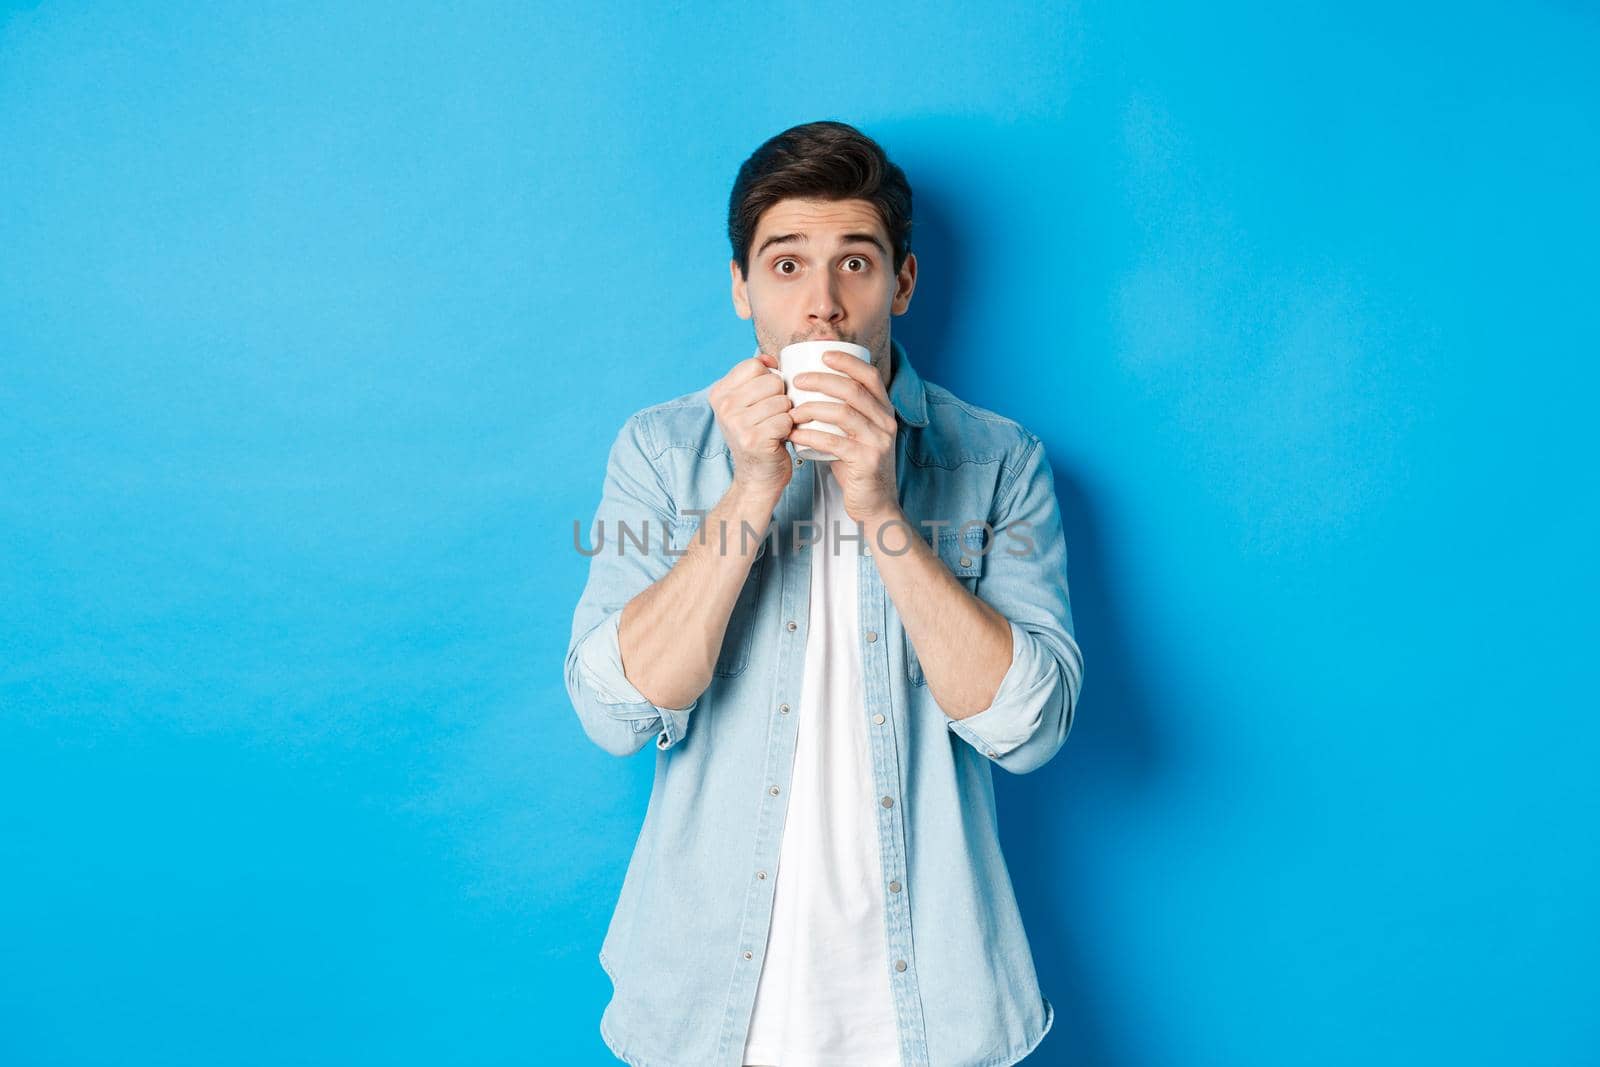 Man looking excited and sipping tea or coffee from white mug, standing over blue background.